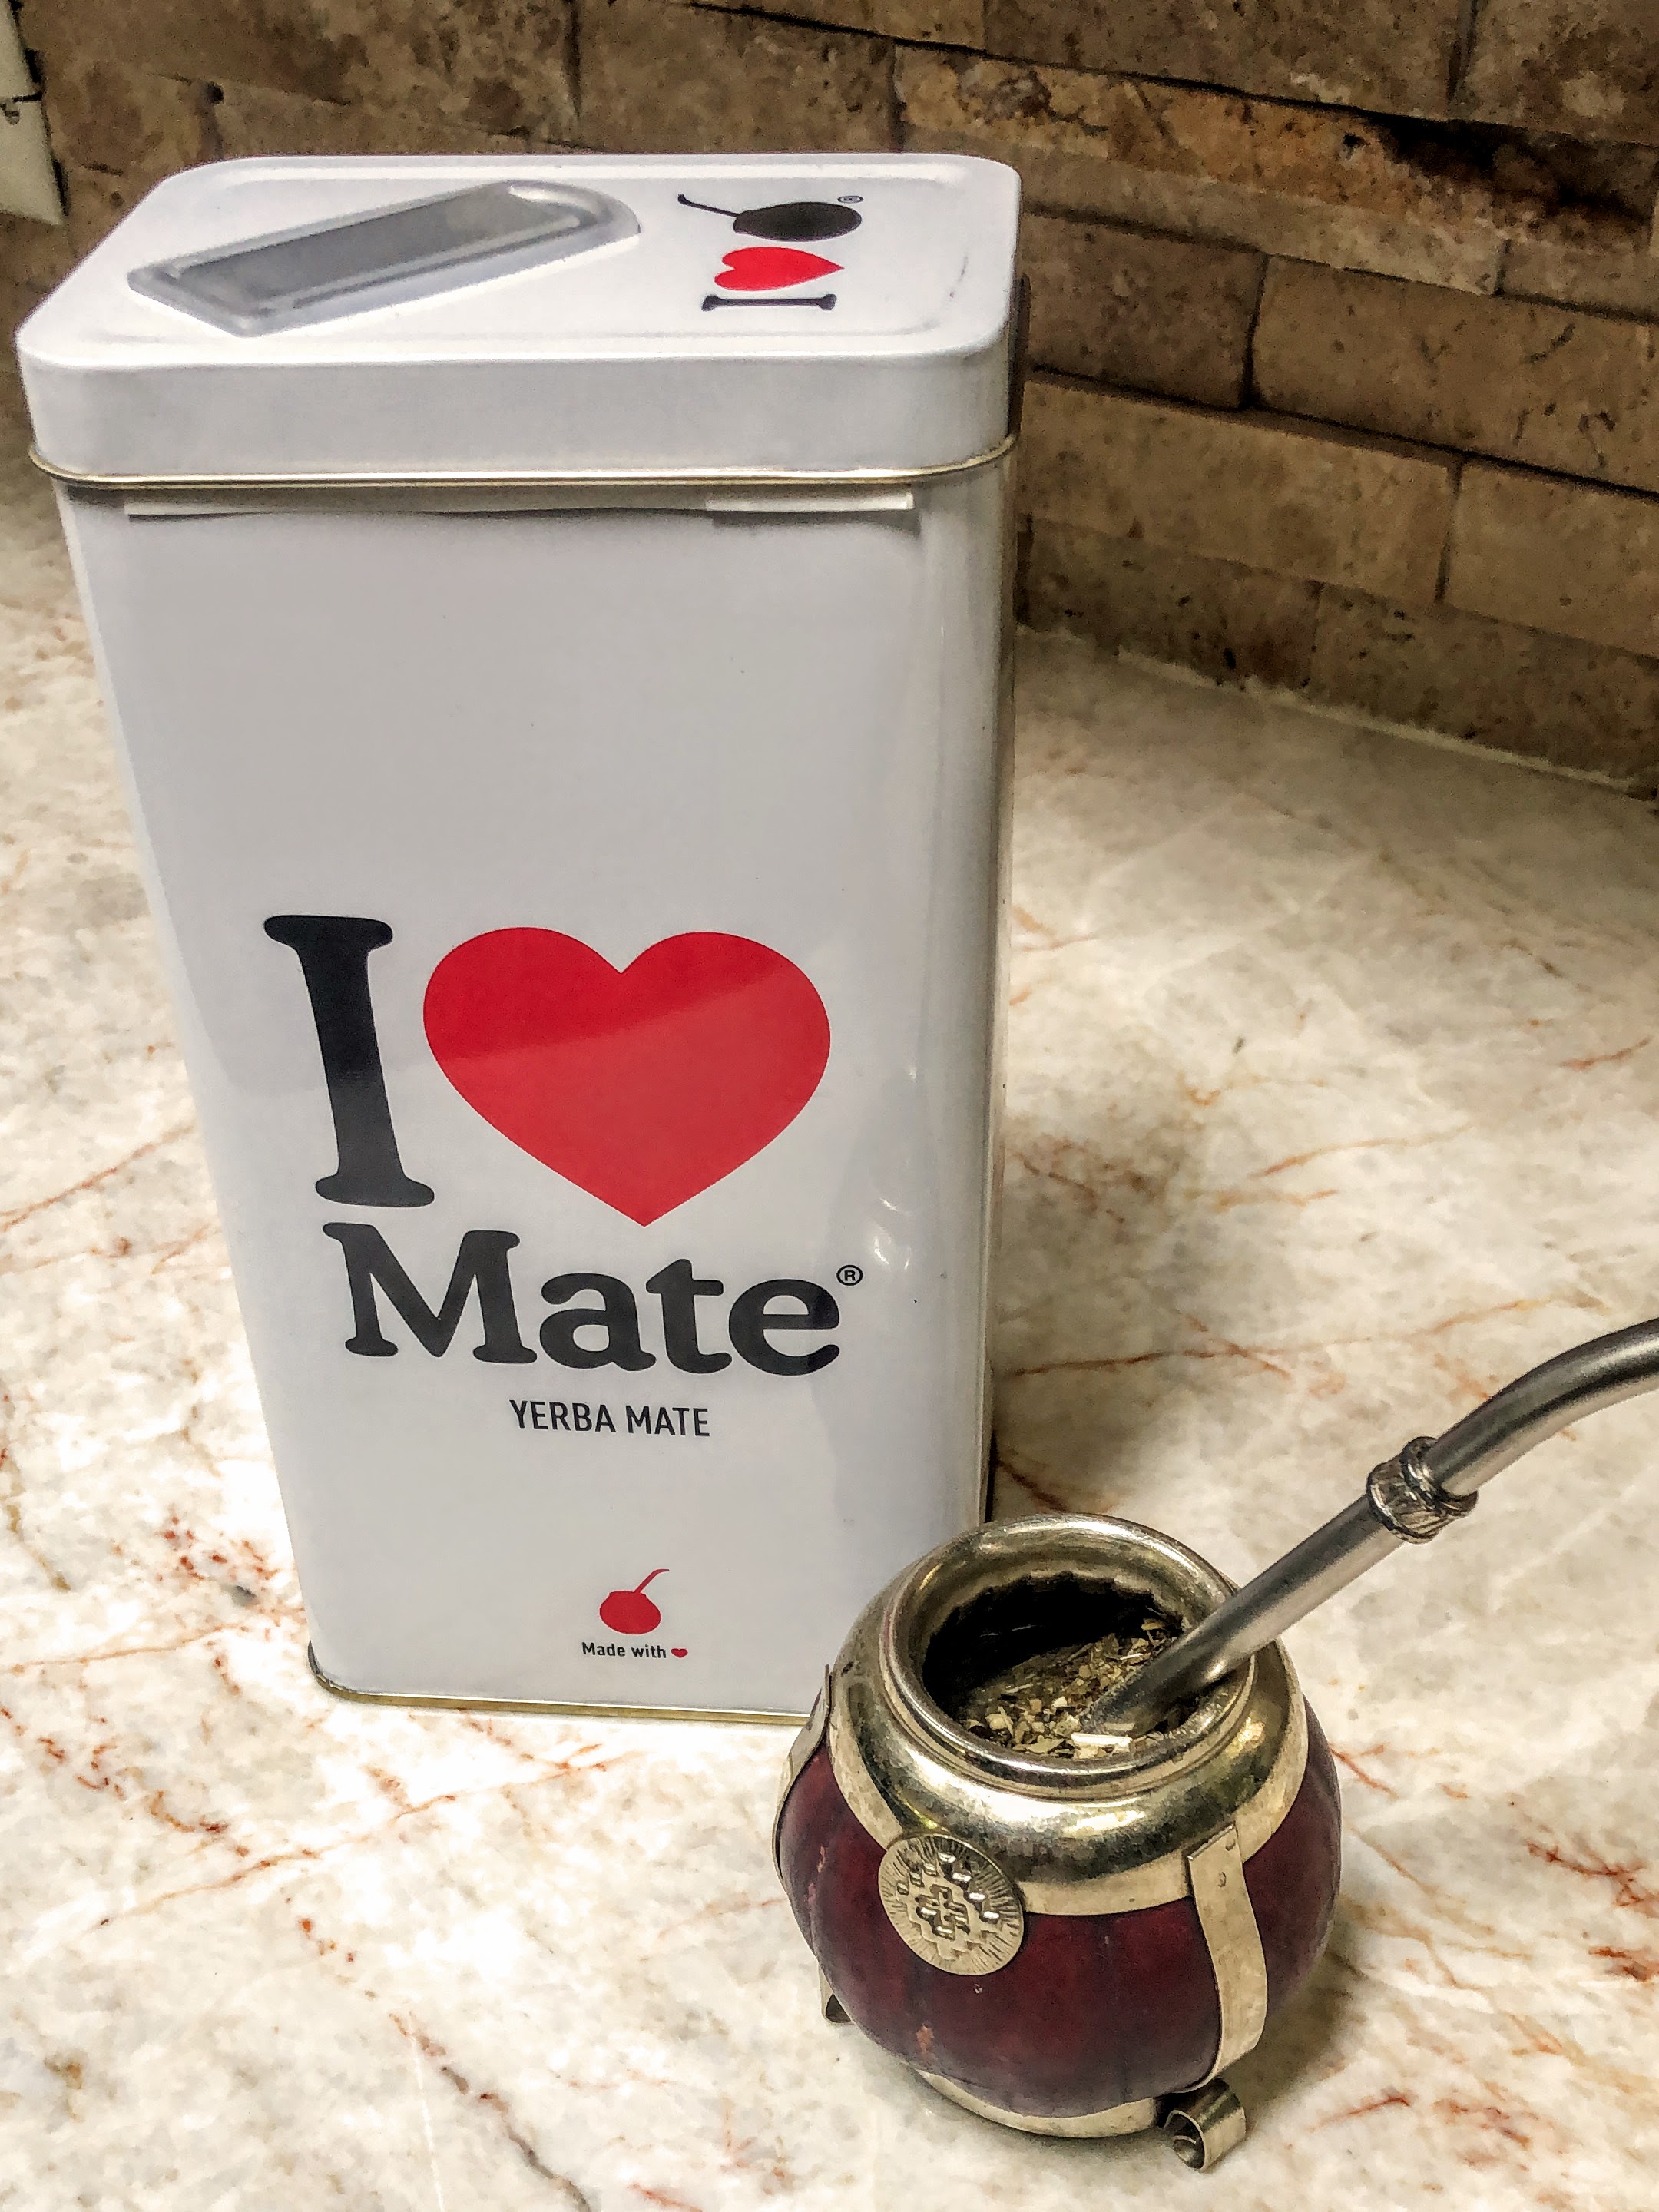 Yerba Mate: the health benefits of the South American Superfood